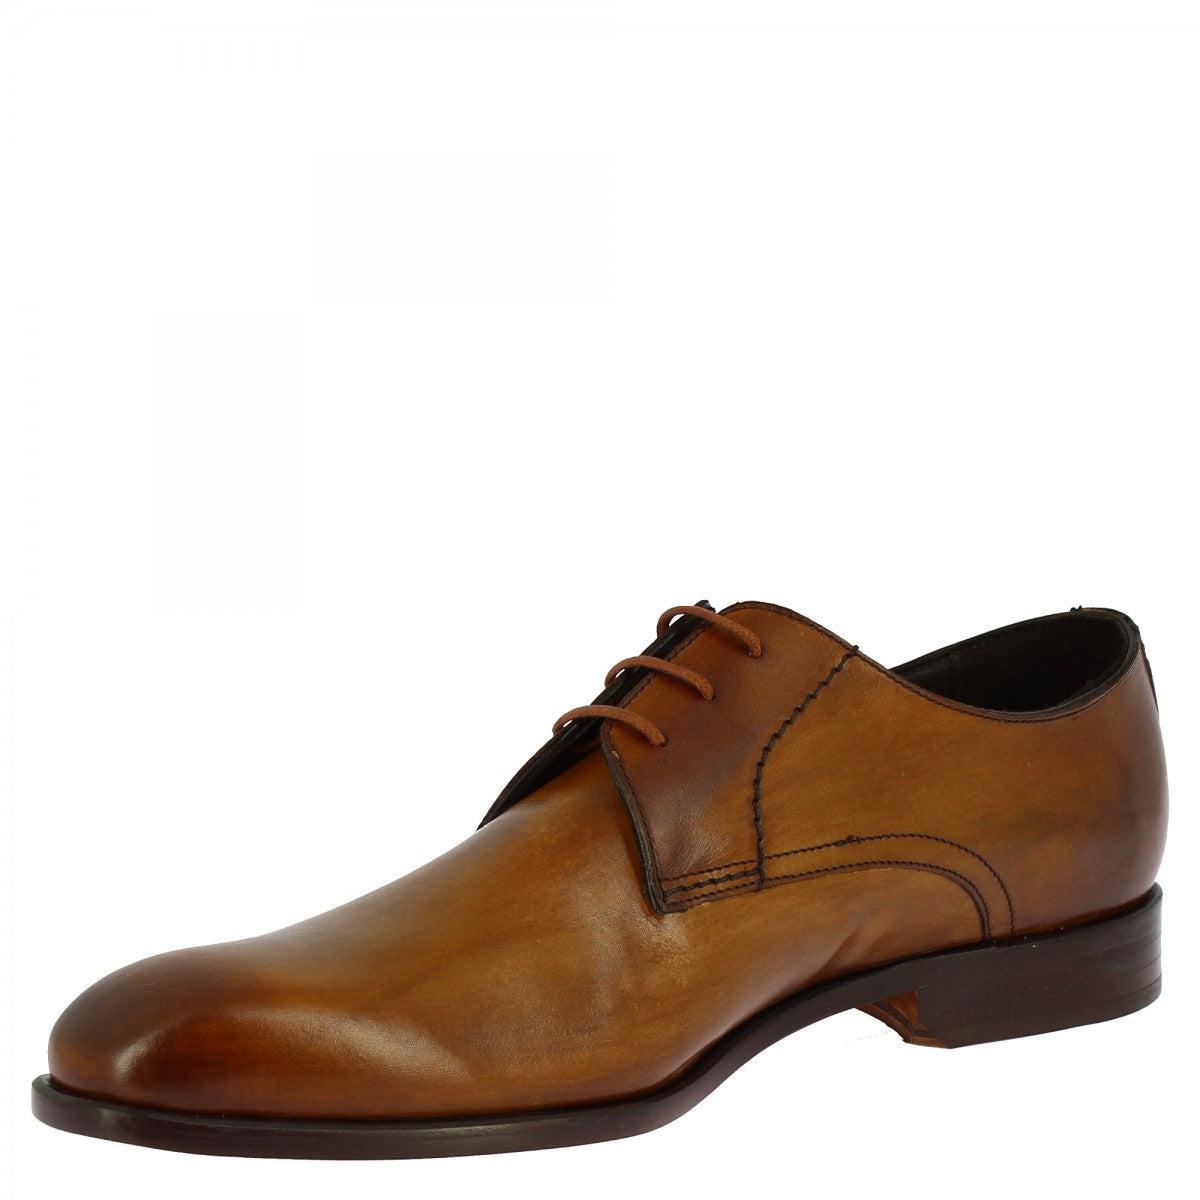 Men New Handmade Brown Leather Shoes, Men's Formal Shoes